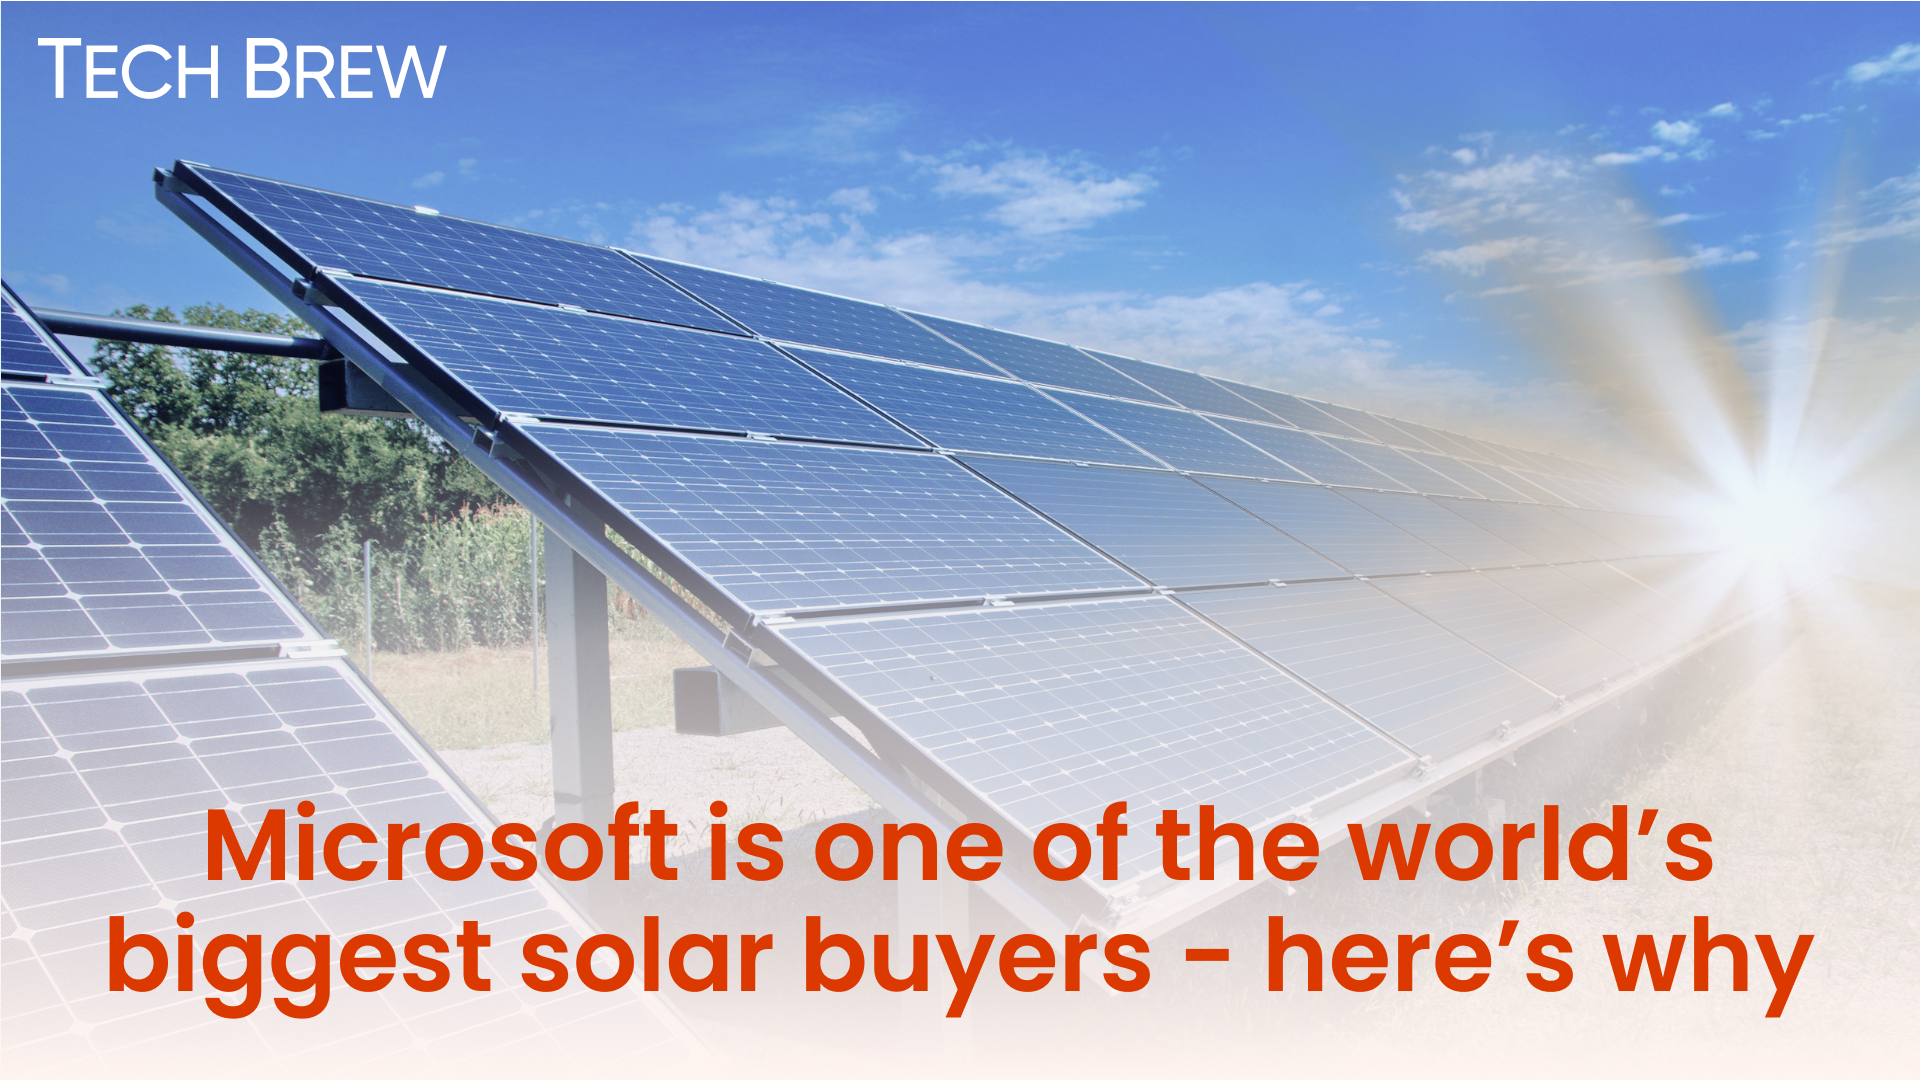 Microsoft is one of the world's biggest solar buyers - here's why